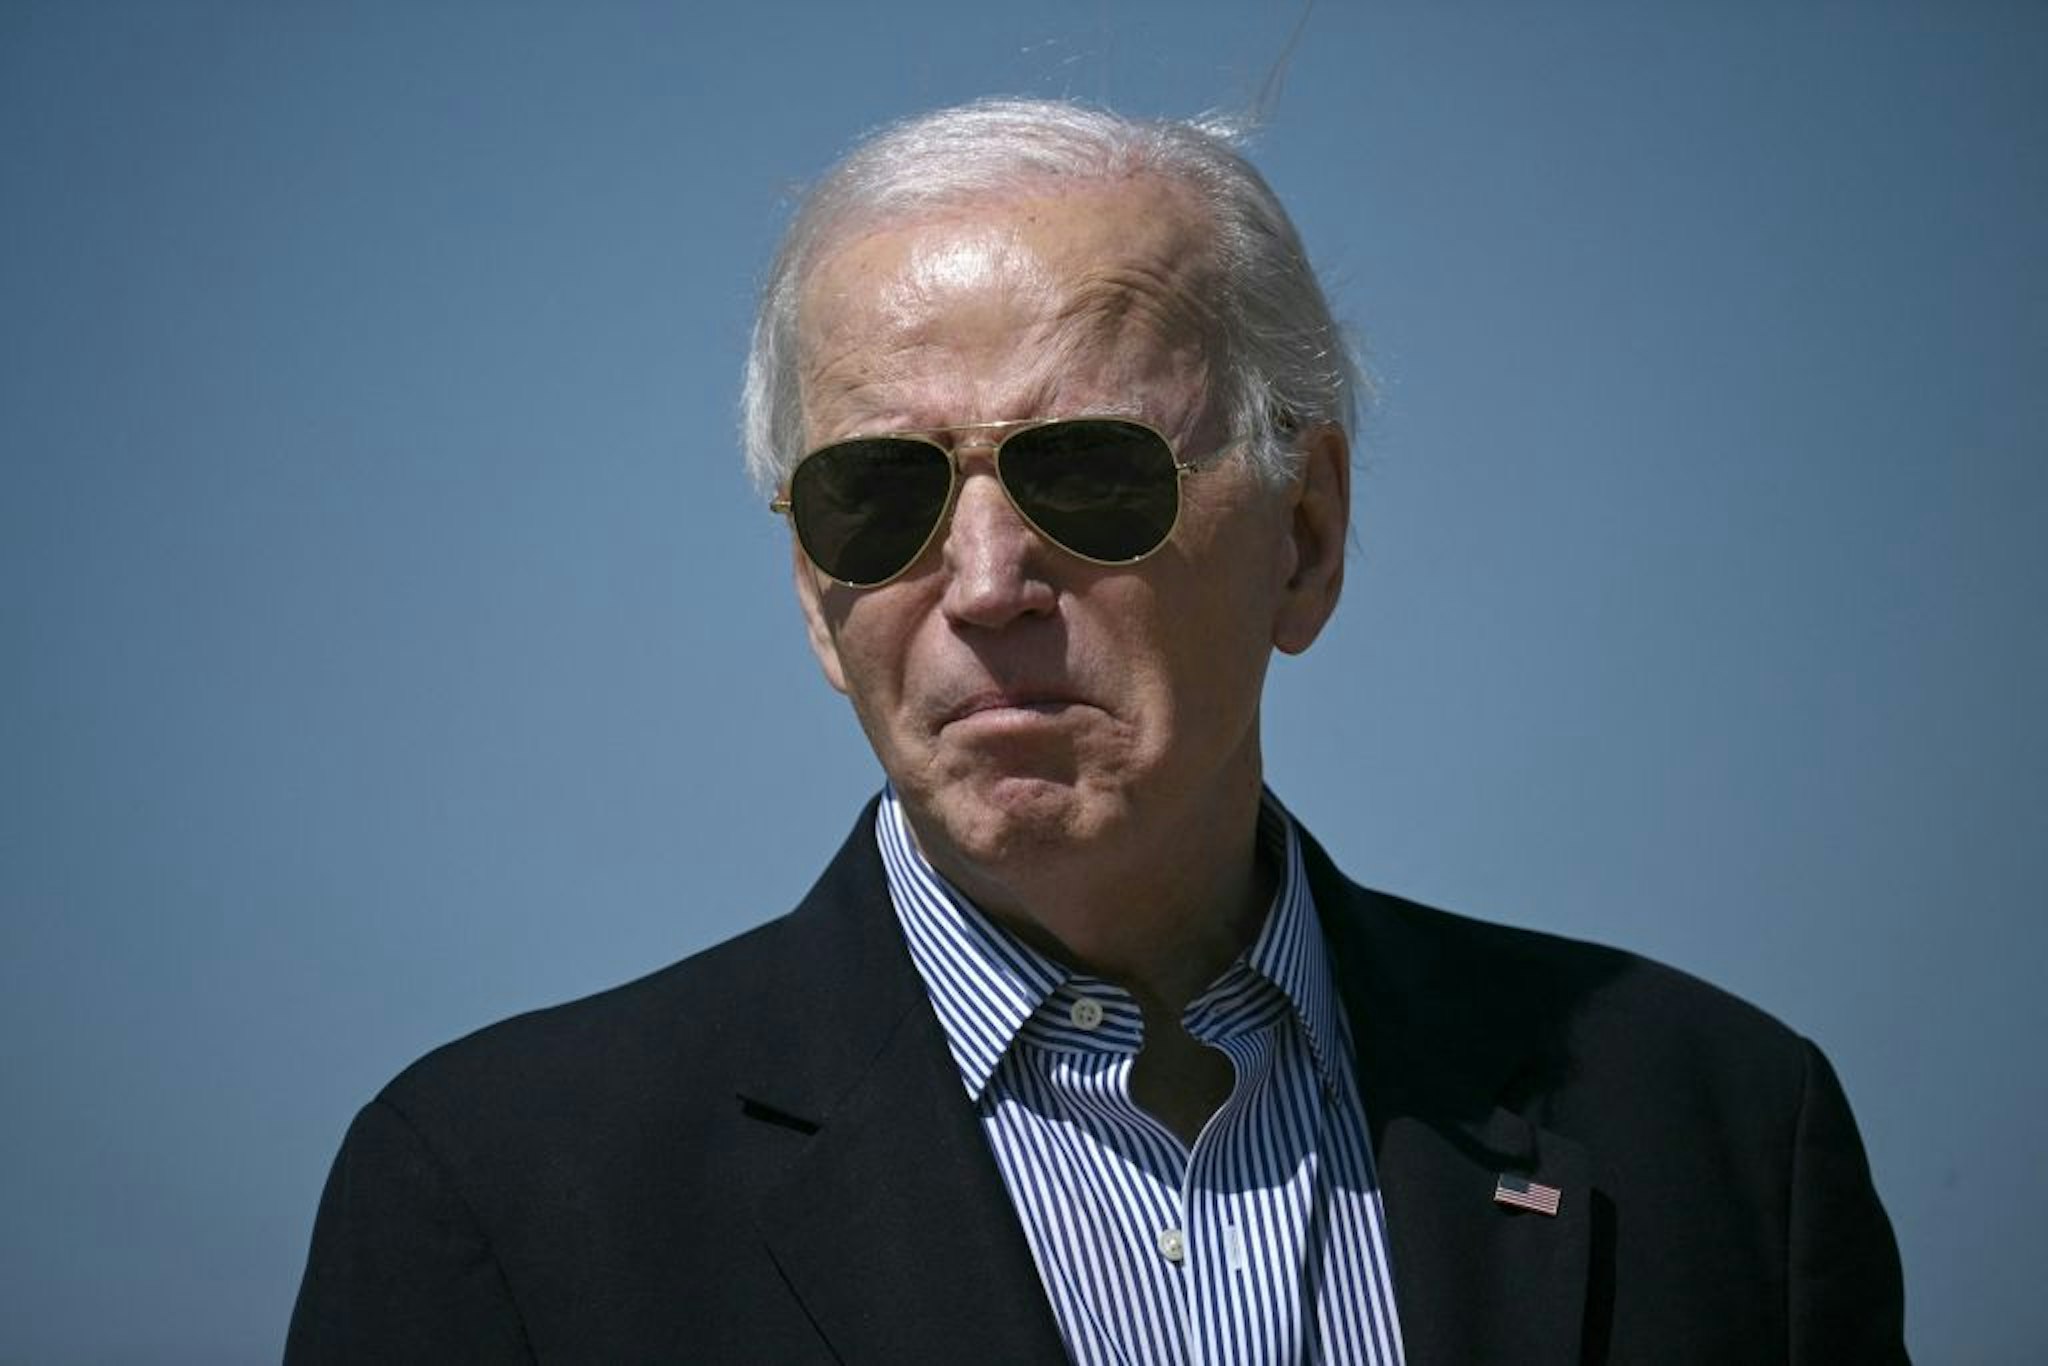 US President Joe Biden walks to board Air Force One at Joint Base Andrews, Maryland, on March 29, 2024. Biden is heading to Camp David, the presidential retreat in Maryland, to spend the Easter weekend.